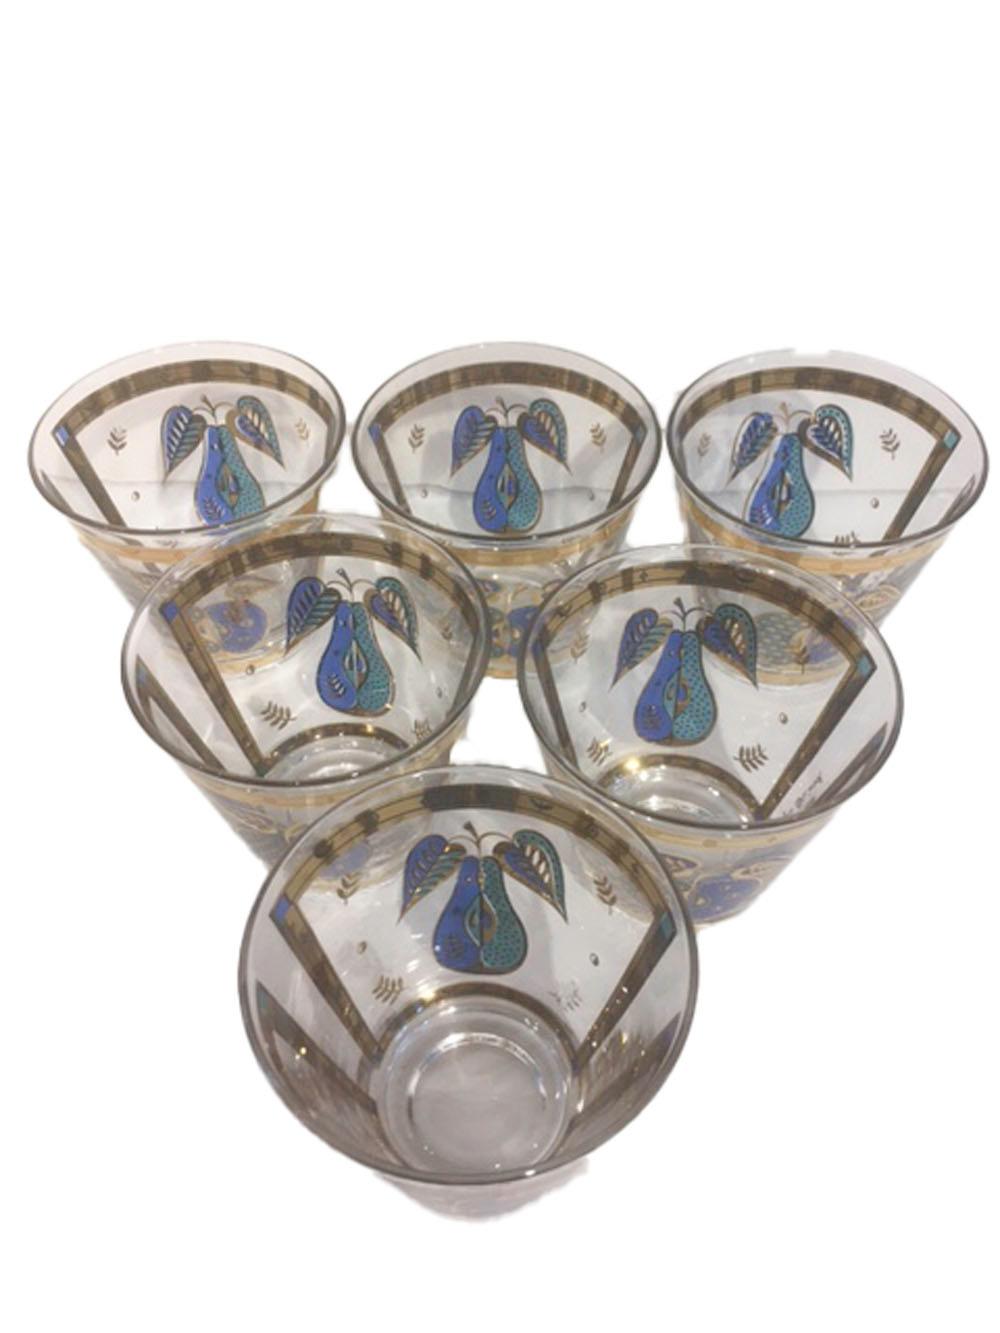 Mid-Century Modern old fashioned glasses by Georges Briard in the Forbidden Fruit pattern. Each of clear glass decorated in translucent blue and green enamel and 22 karat gold. Each glass has a pear on one side and an apple on the other within an